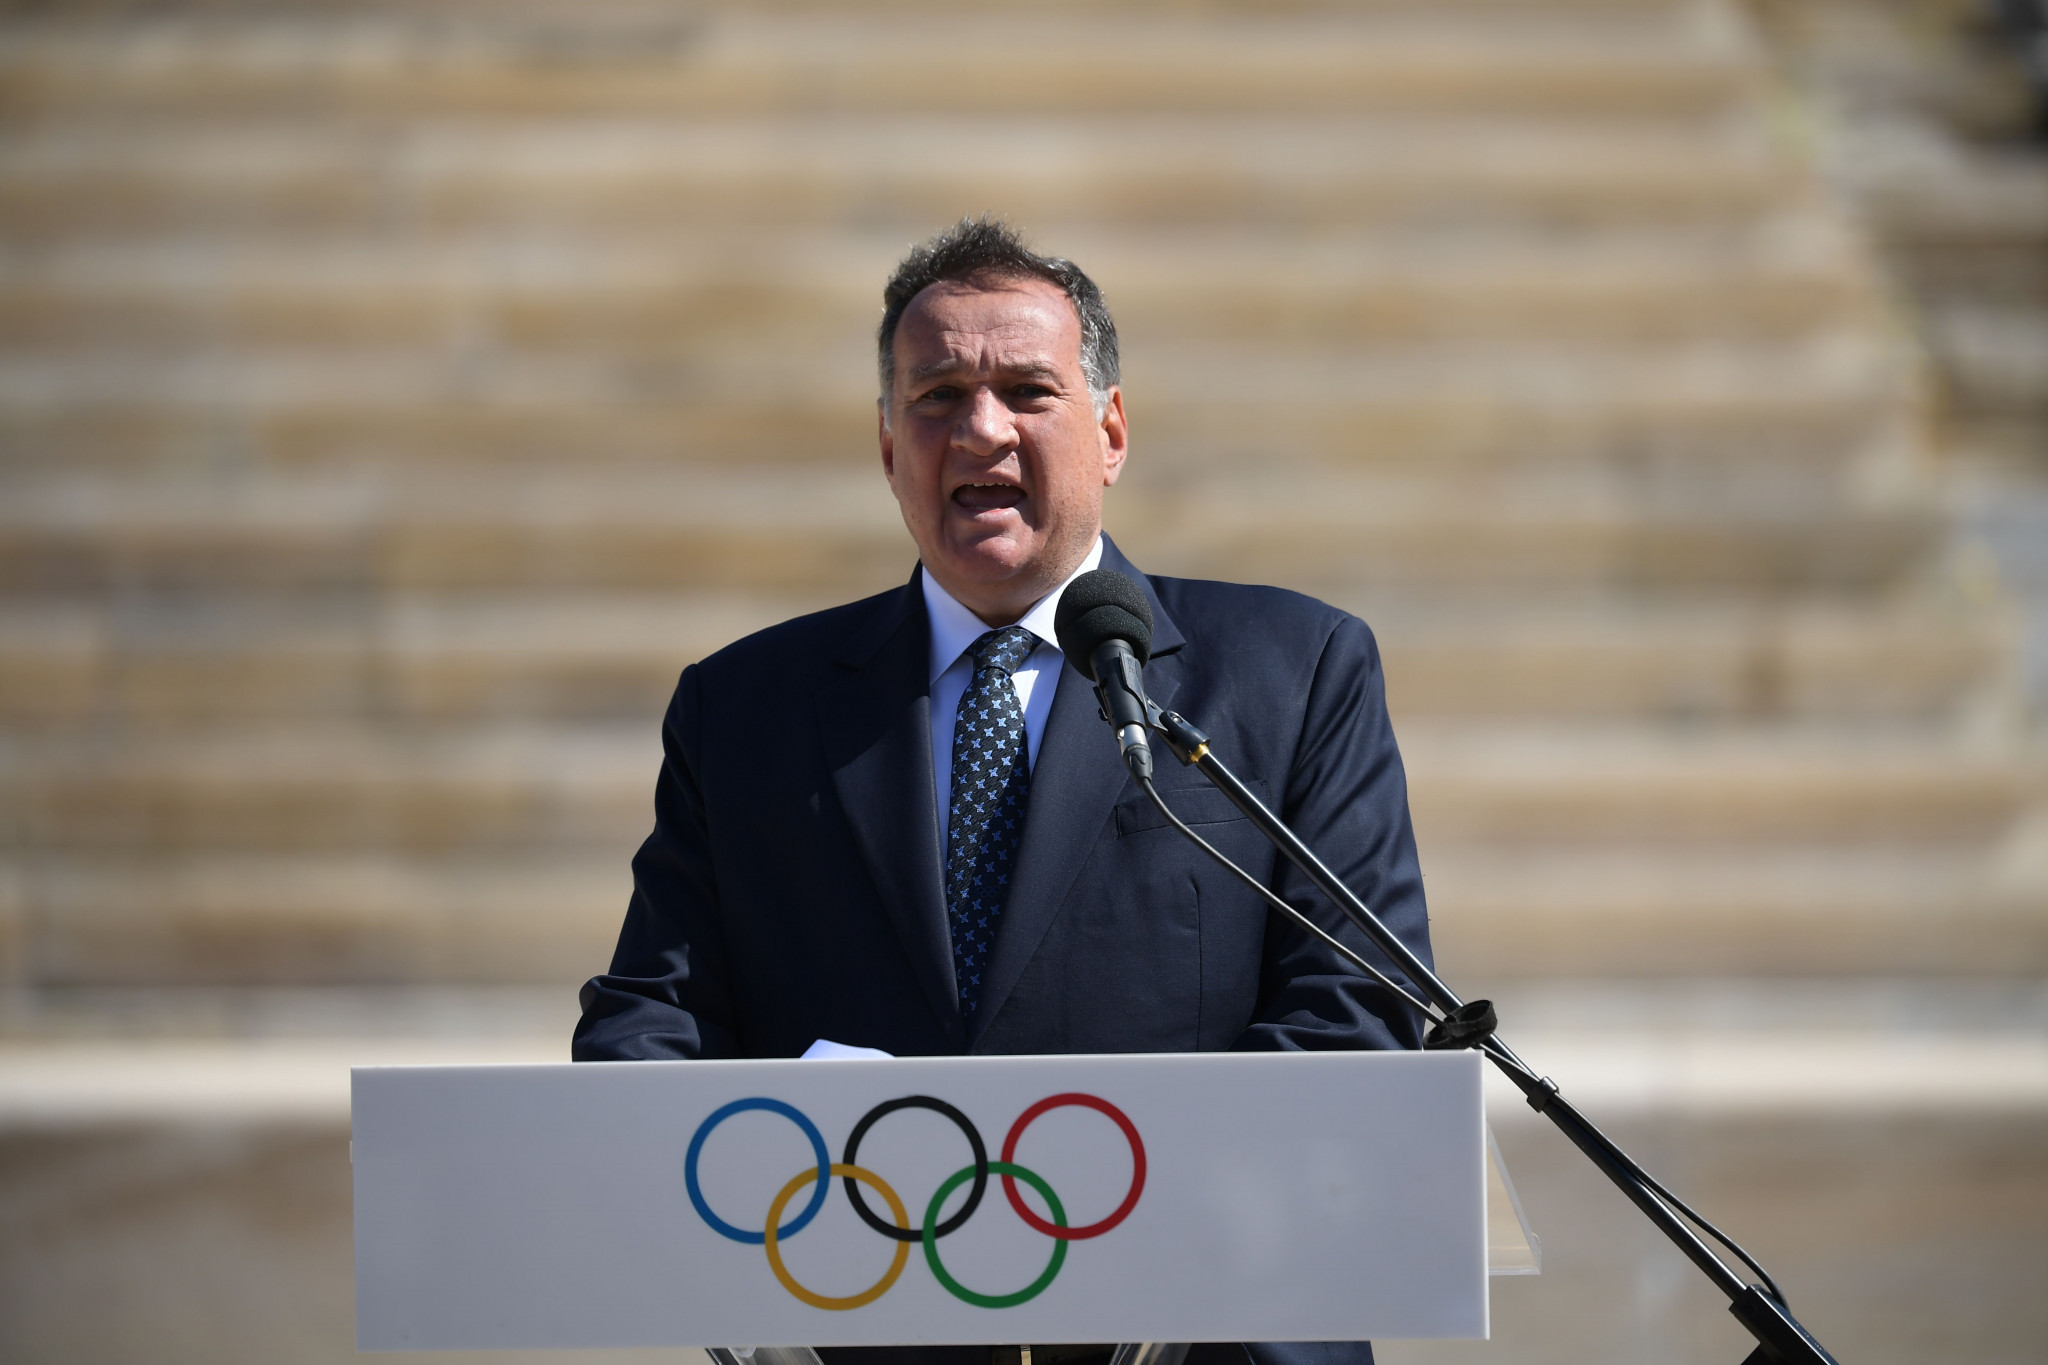 EOC President Spyros Capralos is looking forward to showing NOC representatives around the renovated International Olympic Academy in his home country ©HOC